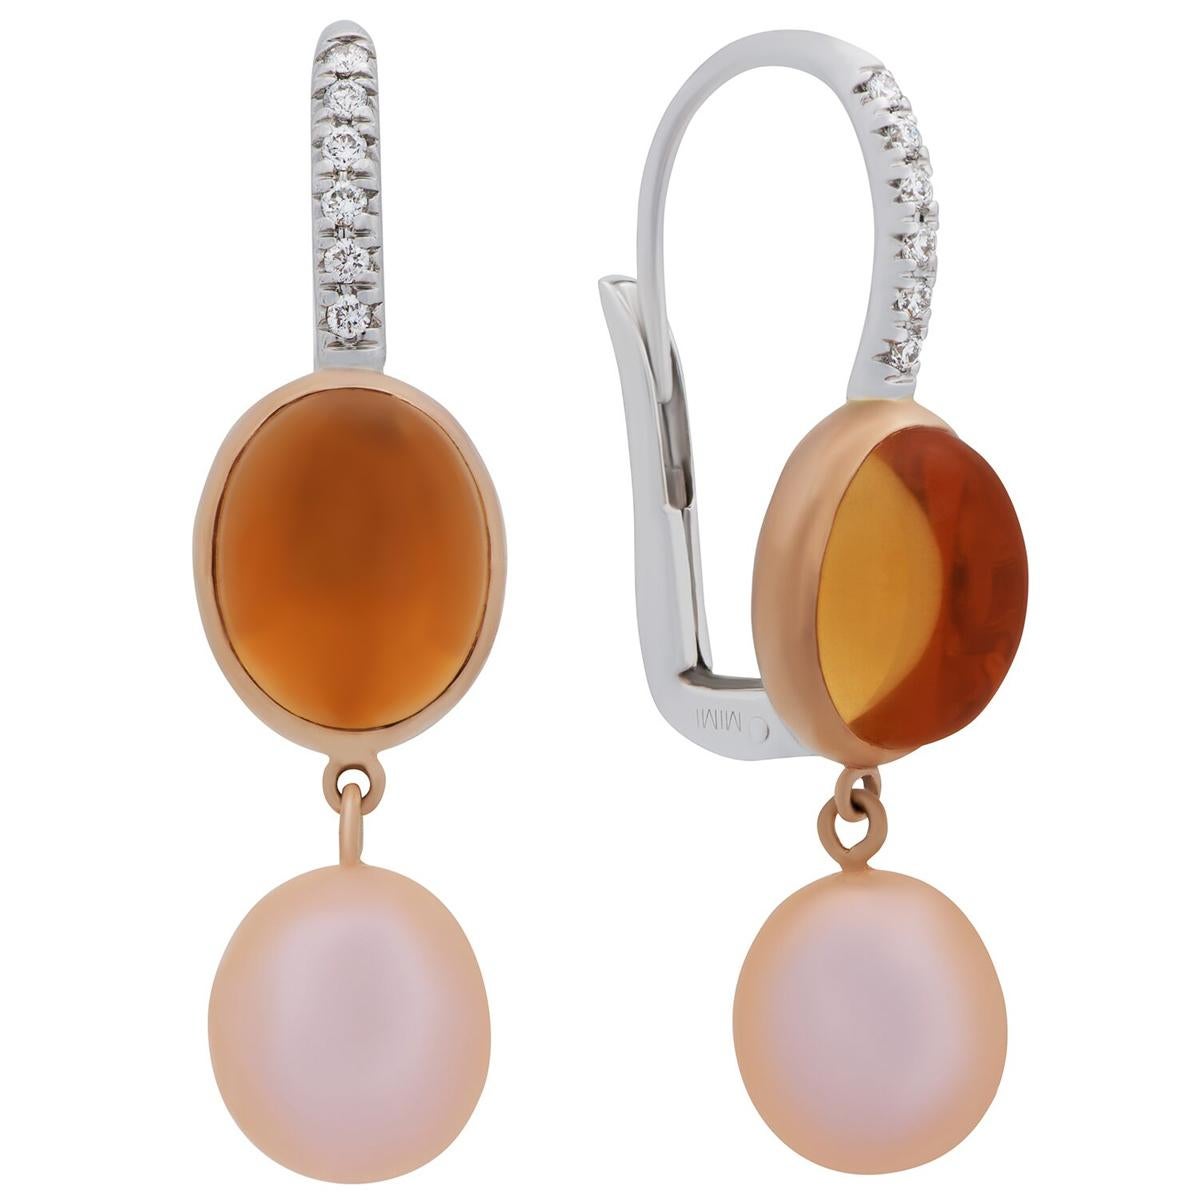 A fabulous pair of Mimi Milano earrings featuring 6.84cts of citrine, complemented by 8mm freshwater pearls in 18k white gold and rose gold.